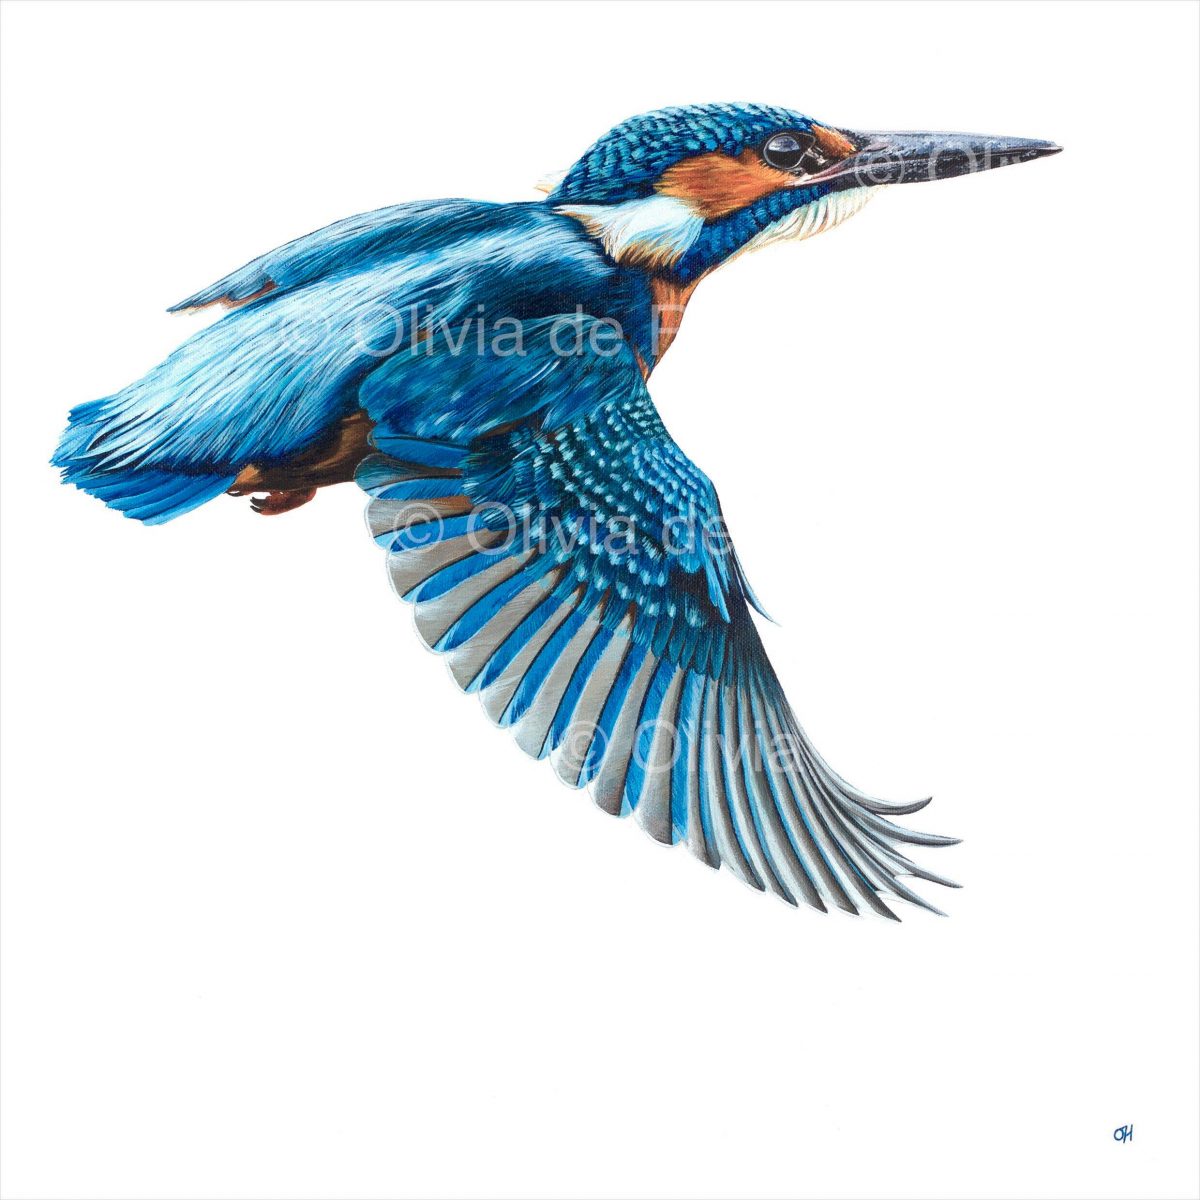 Kingfisher - limited edition giclée canvas print